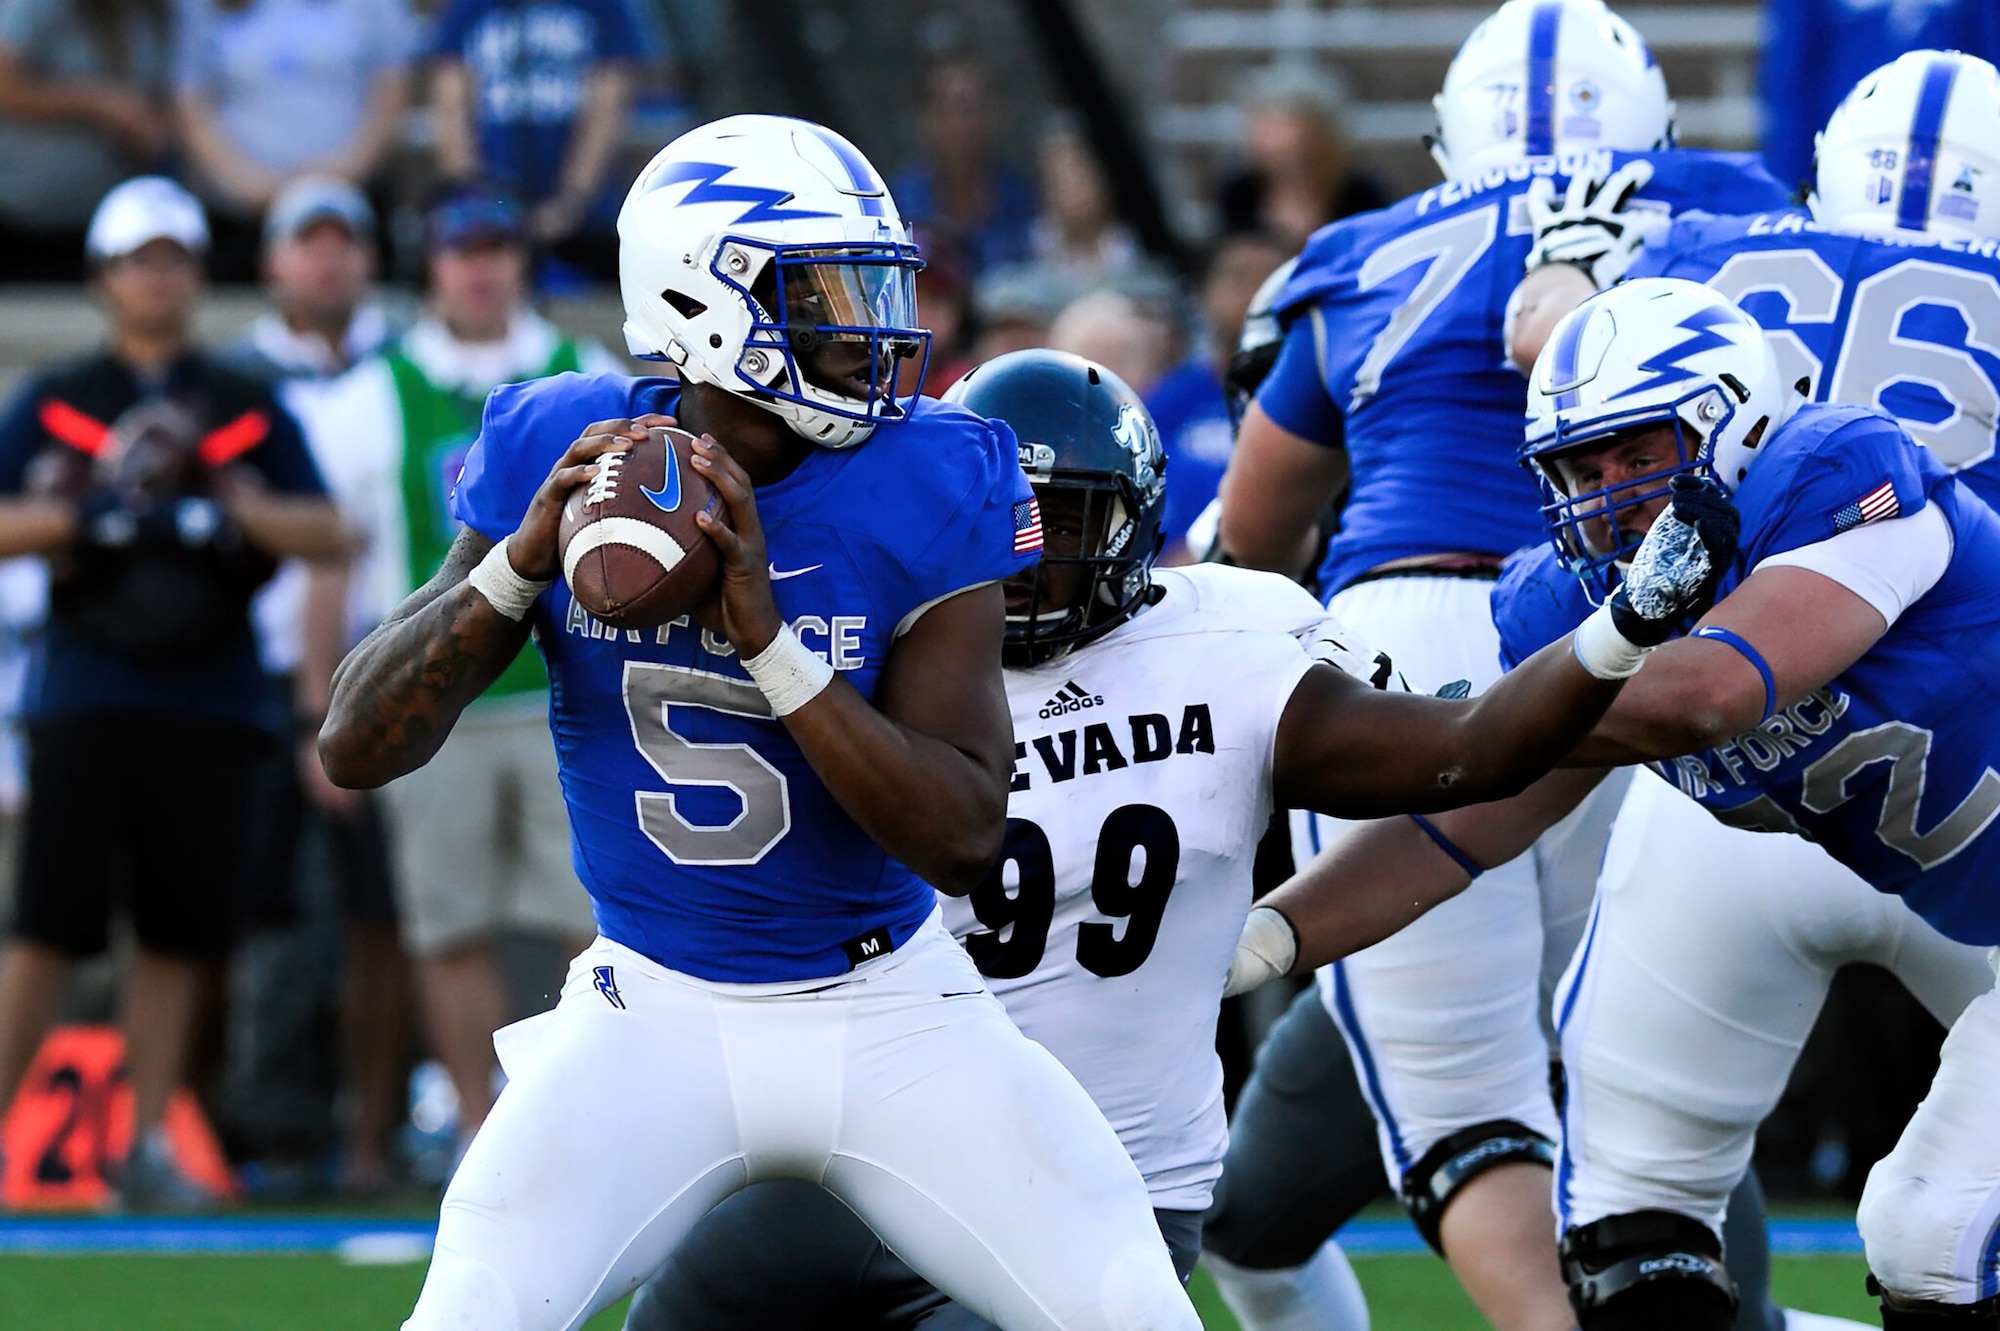 Donald Hammond III, U.S. Air Force Academy Falcons quarterback, looks to make a pass during a game against the Nevada Wolfpack at Falcon Stadium in Colorado Springs, Colo., Sept. 29, 2018. The Wolfpack defeated the Falcons 28-25 as a furious fourth quarter comeback by the Falcons fell short. (U.S. Air Force photo by Bill Evans)